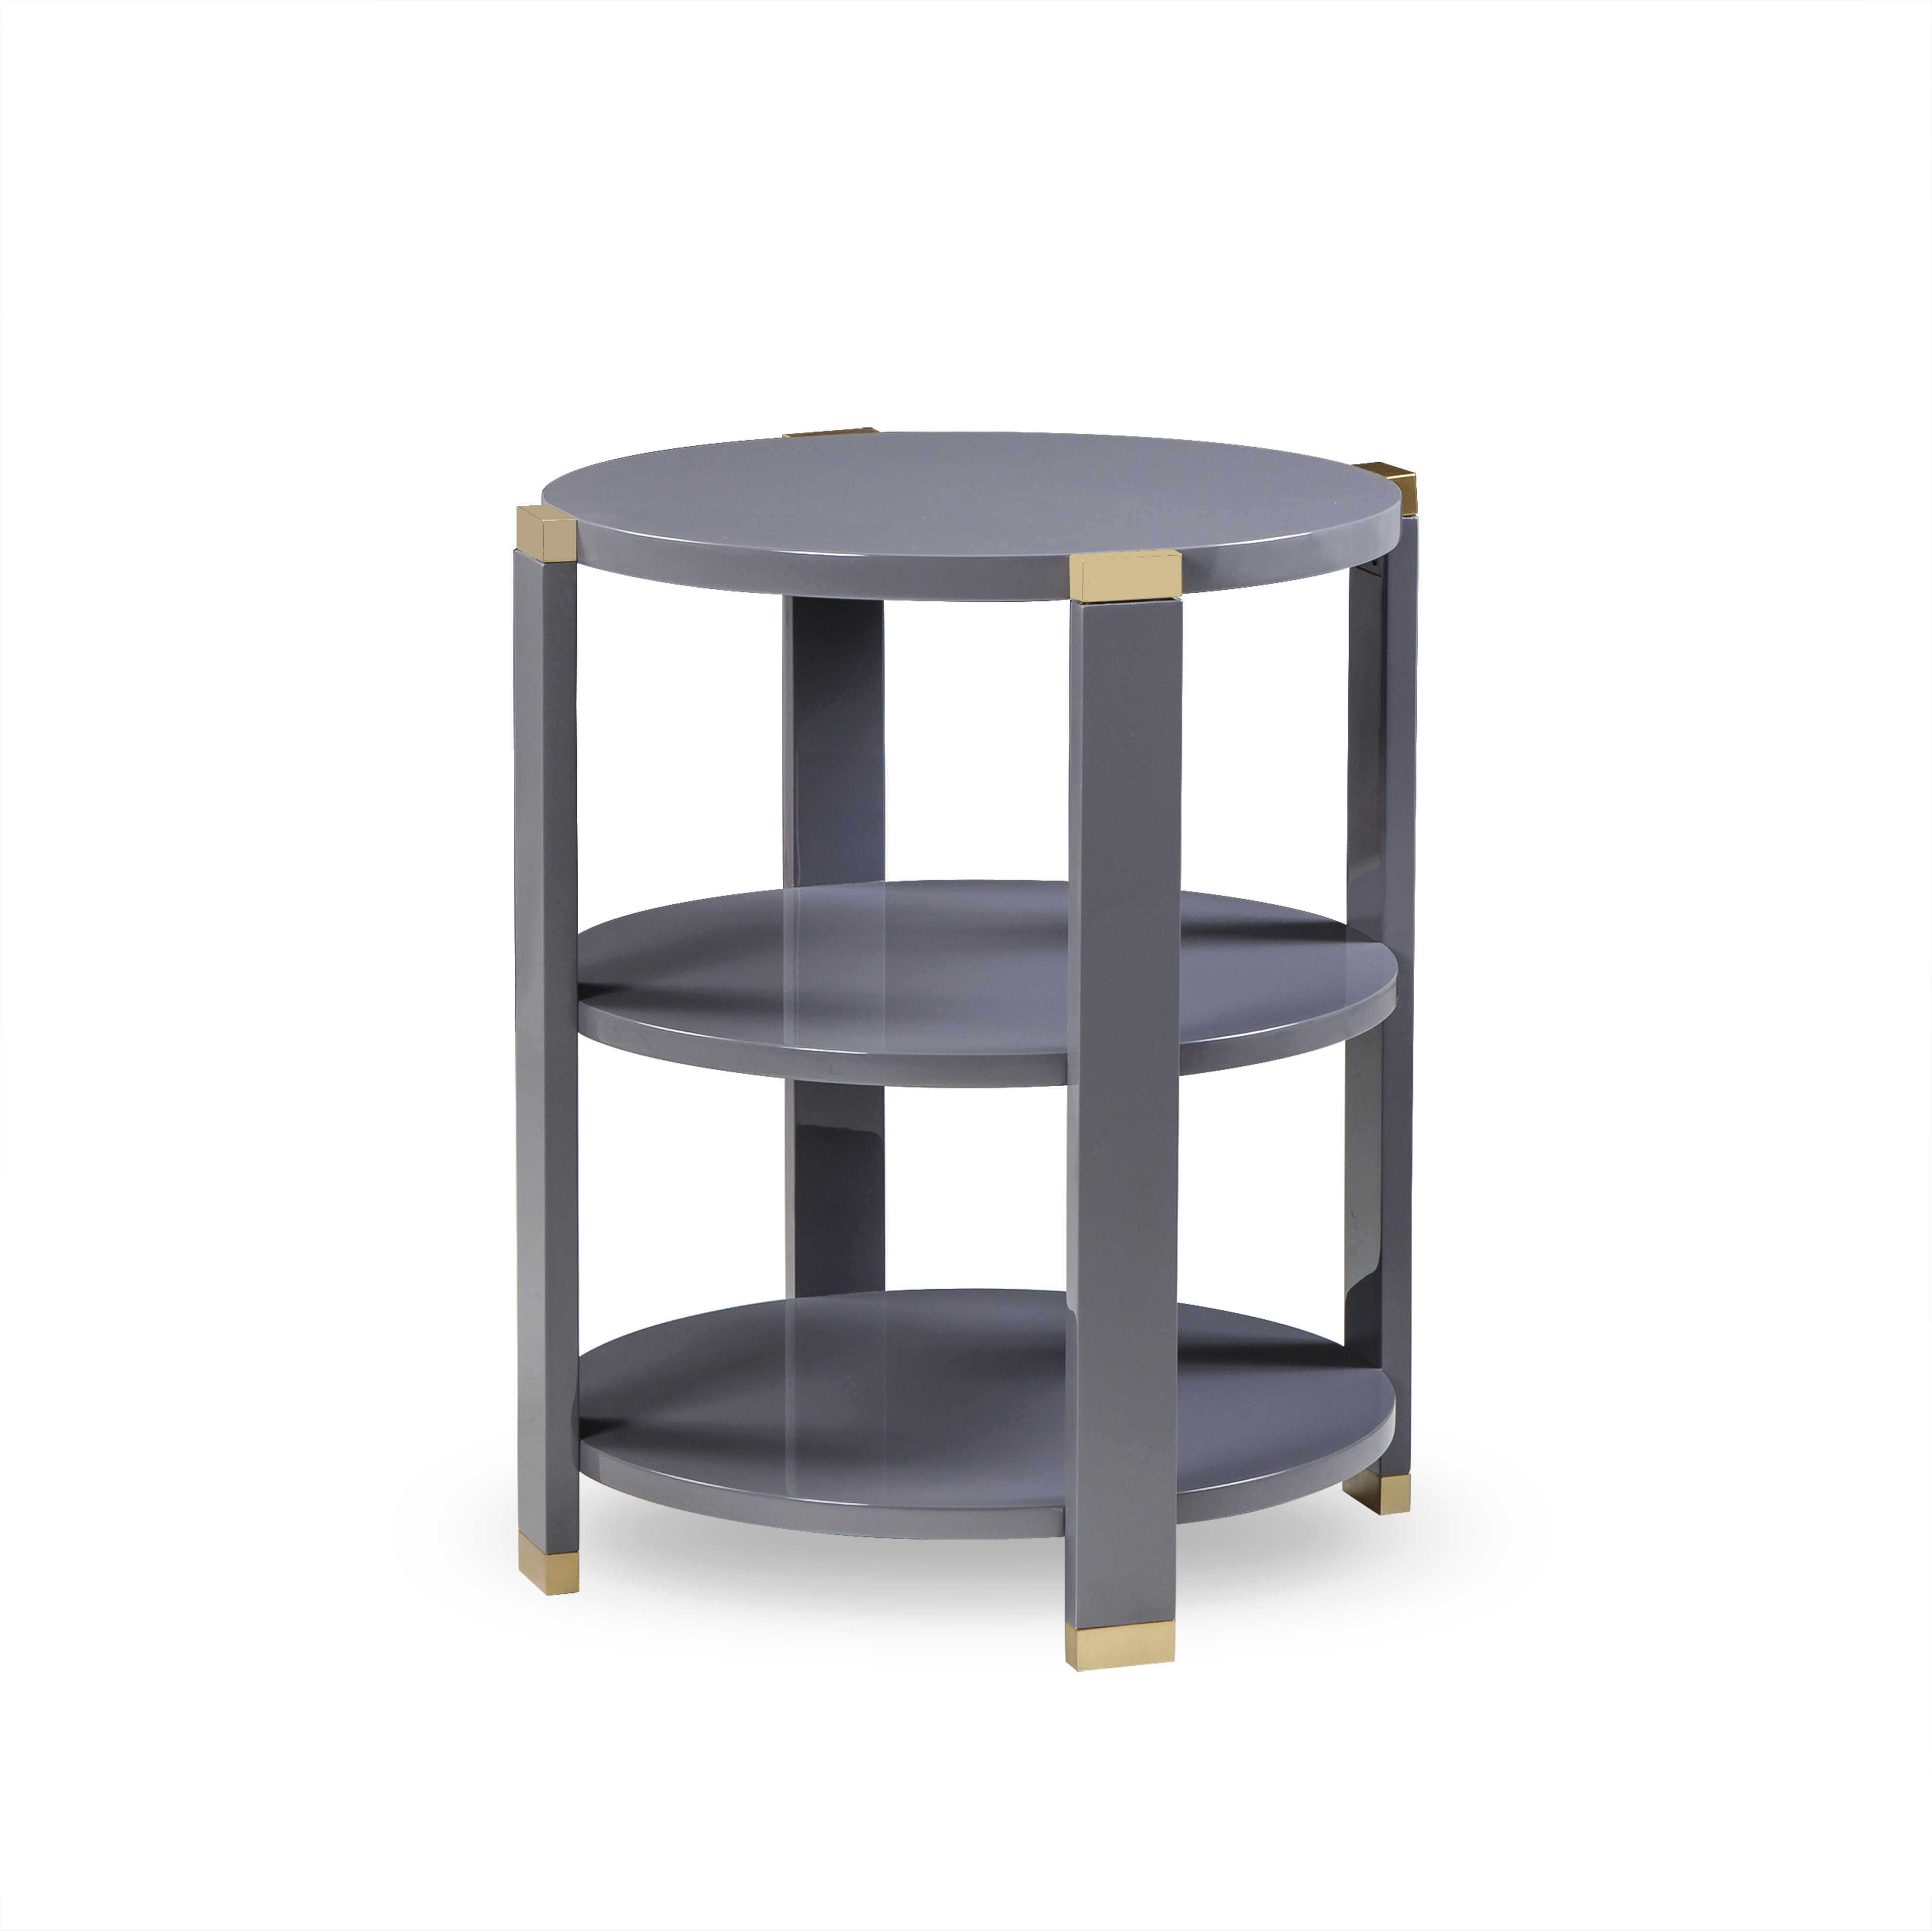 side tables perigold andrew martin park lane end table mirrored pyramid accent outdoor wicker home lamps drop leaf ethan allen iron hairpin legs black dining room furniture silver